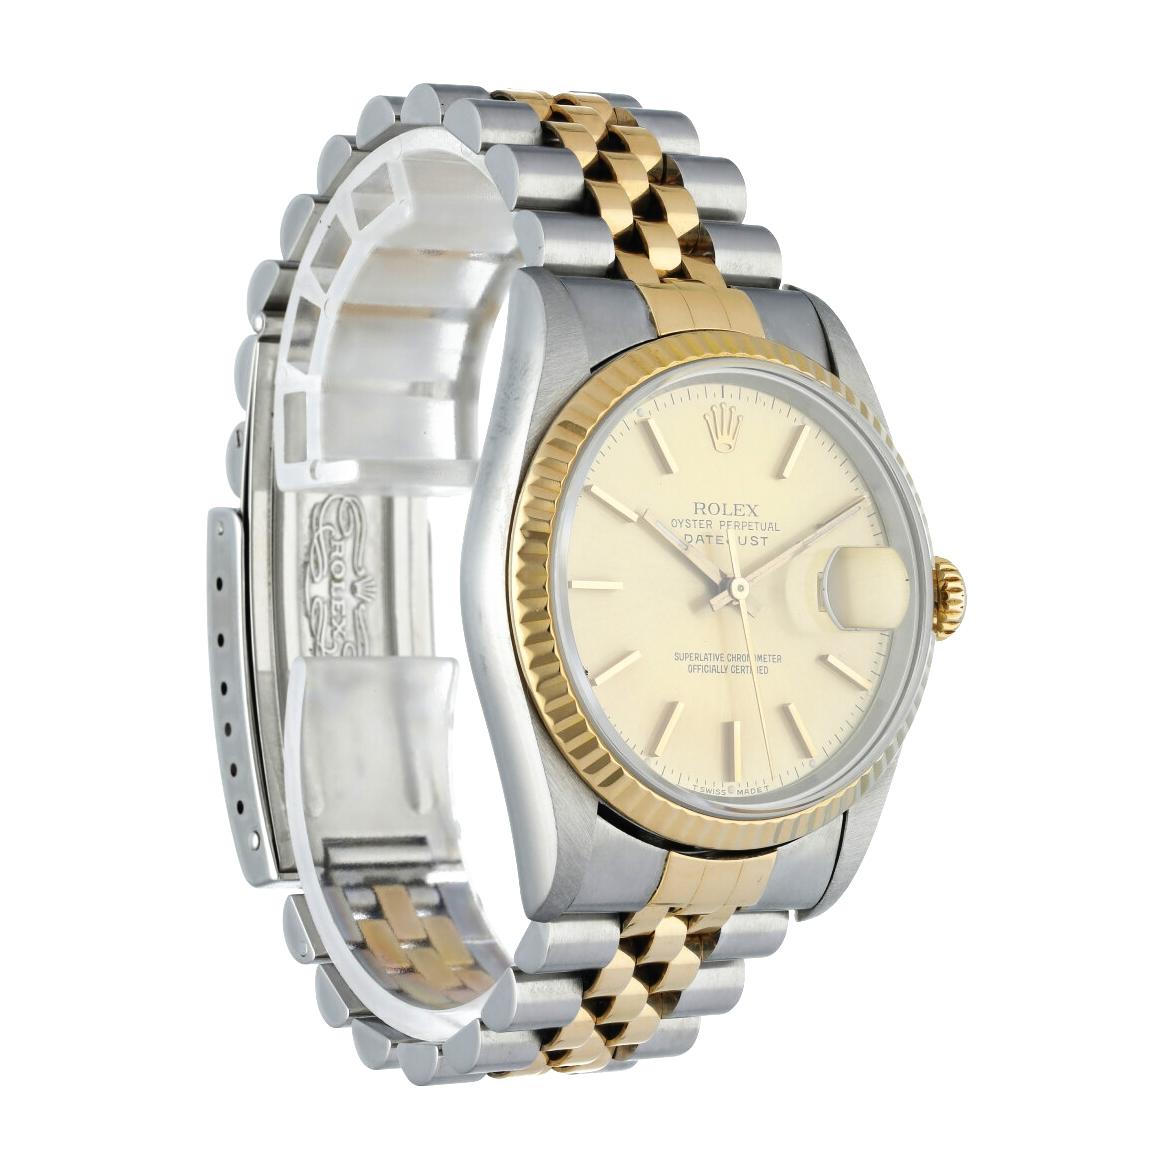 Rolex Datejust 16233 Men's Watch Box Papers In Excellent Condition For Sale In New York, NY